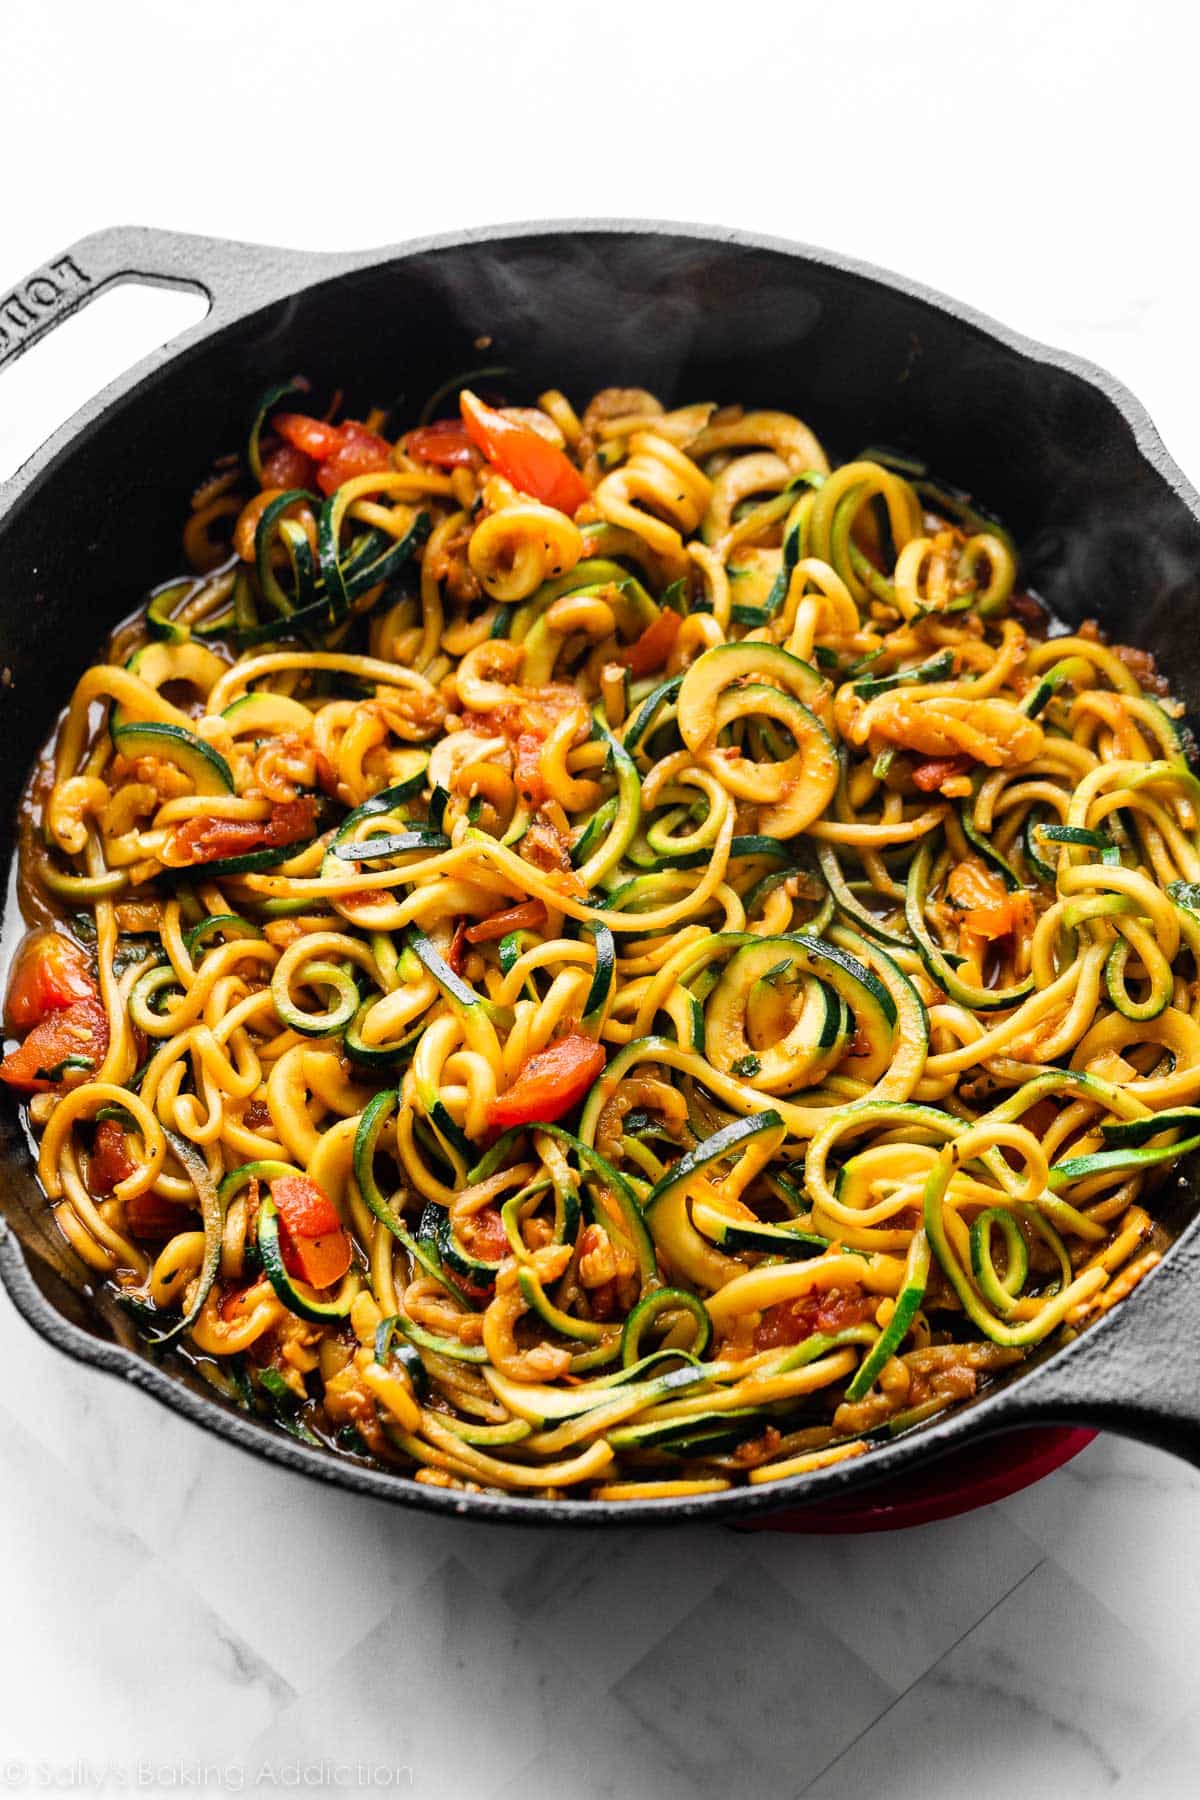 heated zucchini noodles in cast iron skillet with tomatoes and garlic.